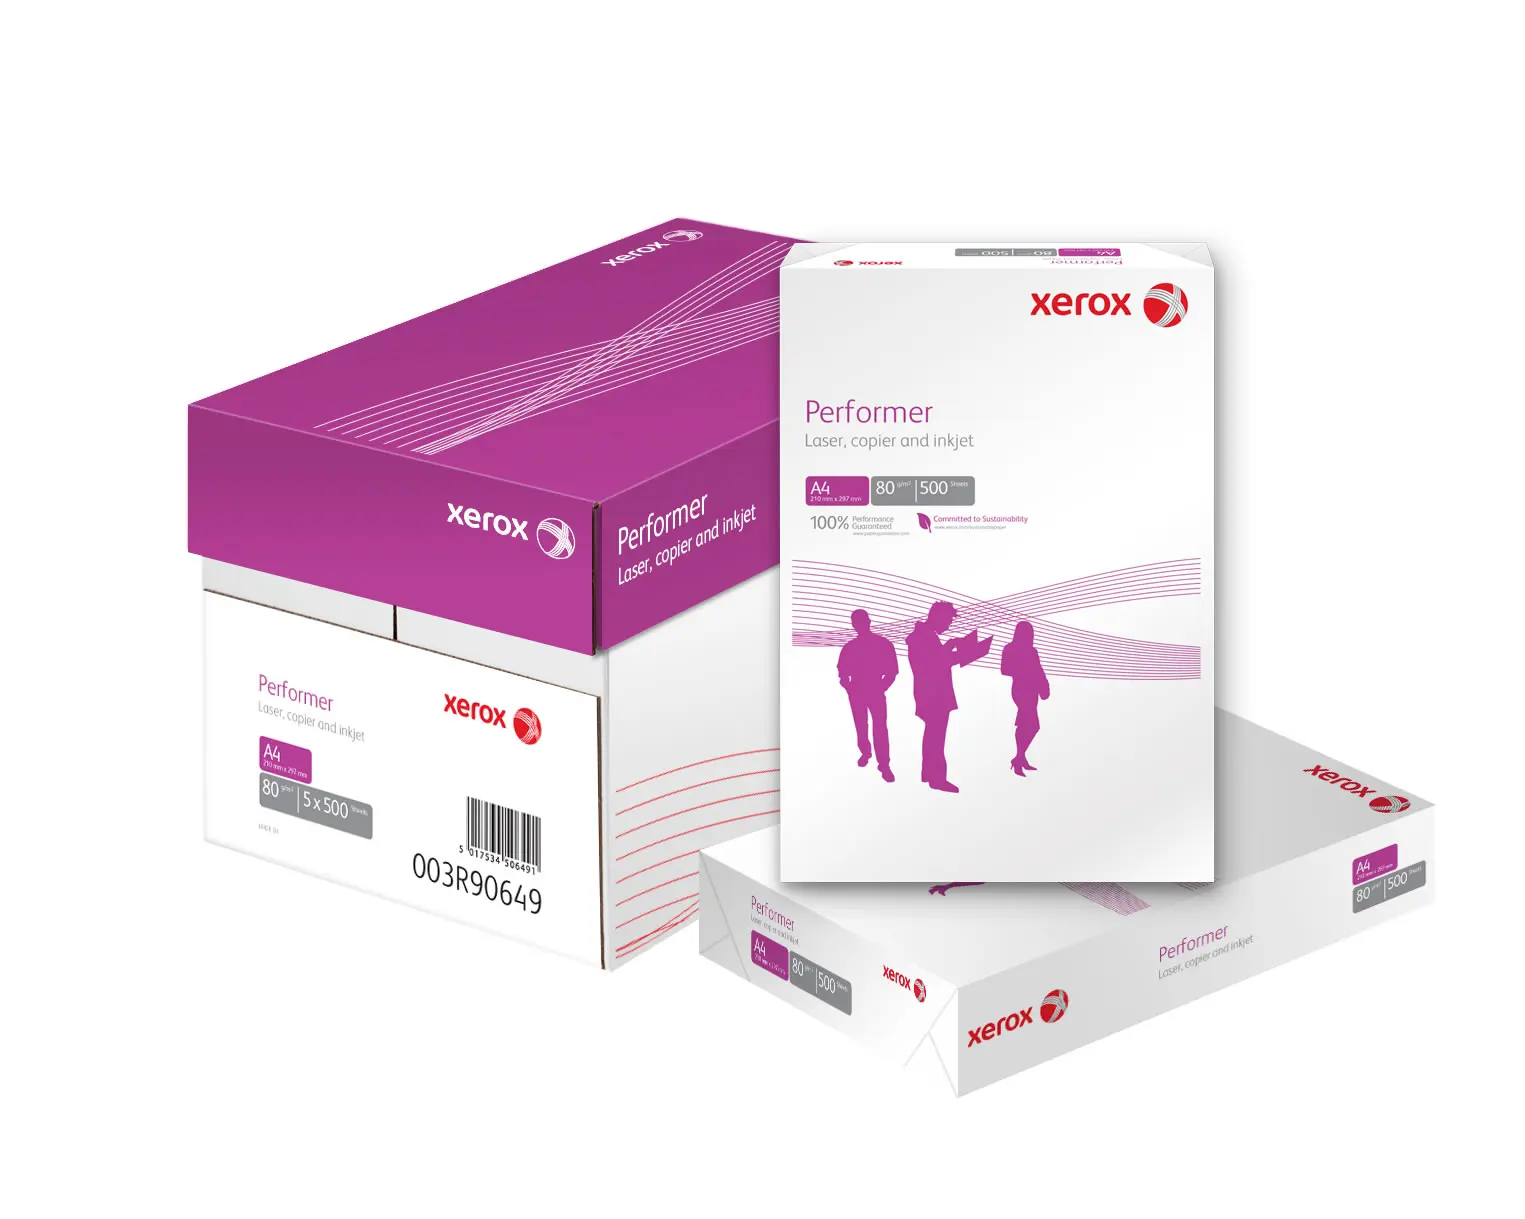 Xerox A3 White Printer Paper 80 gsm Office Copier Paper 1 Ream 500 Sheets 